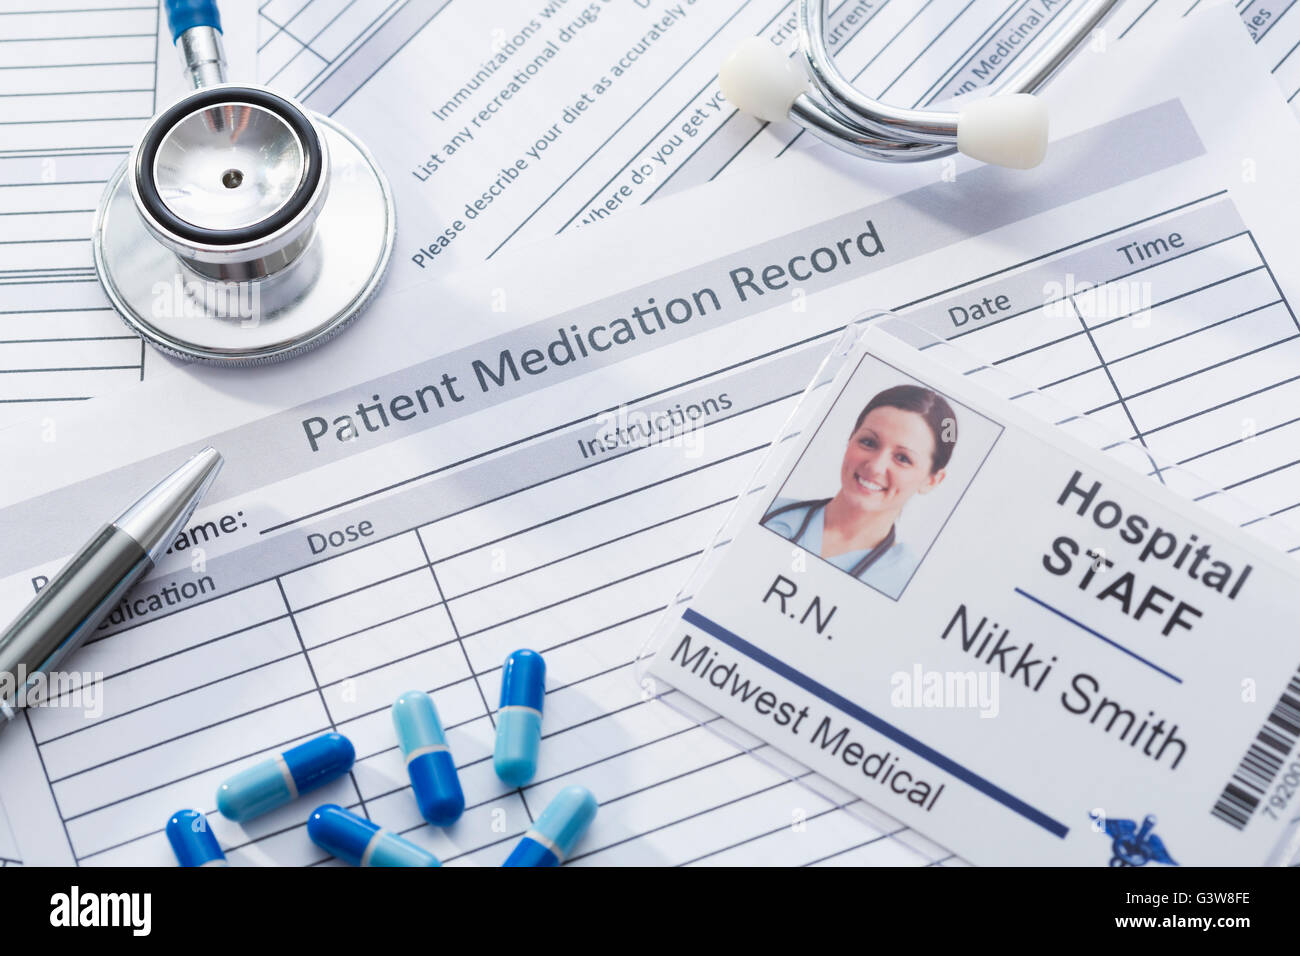 Stethoscope, pills and name tag on medical record Stock Photo